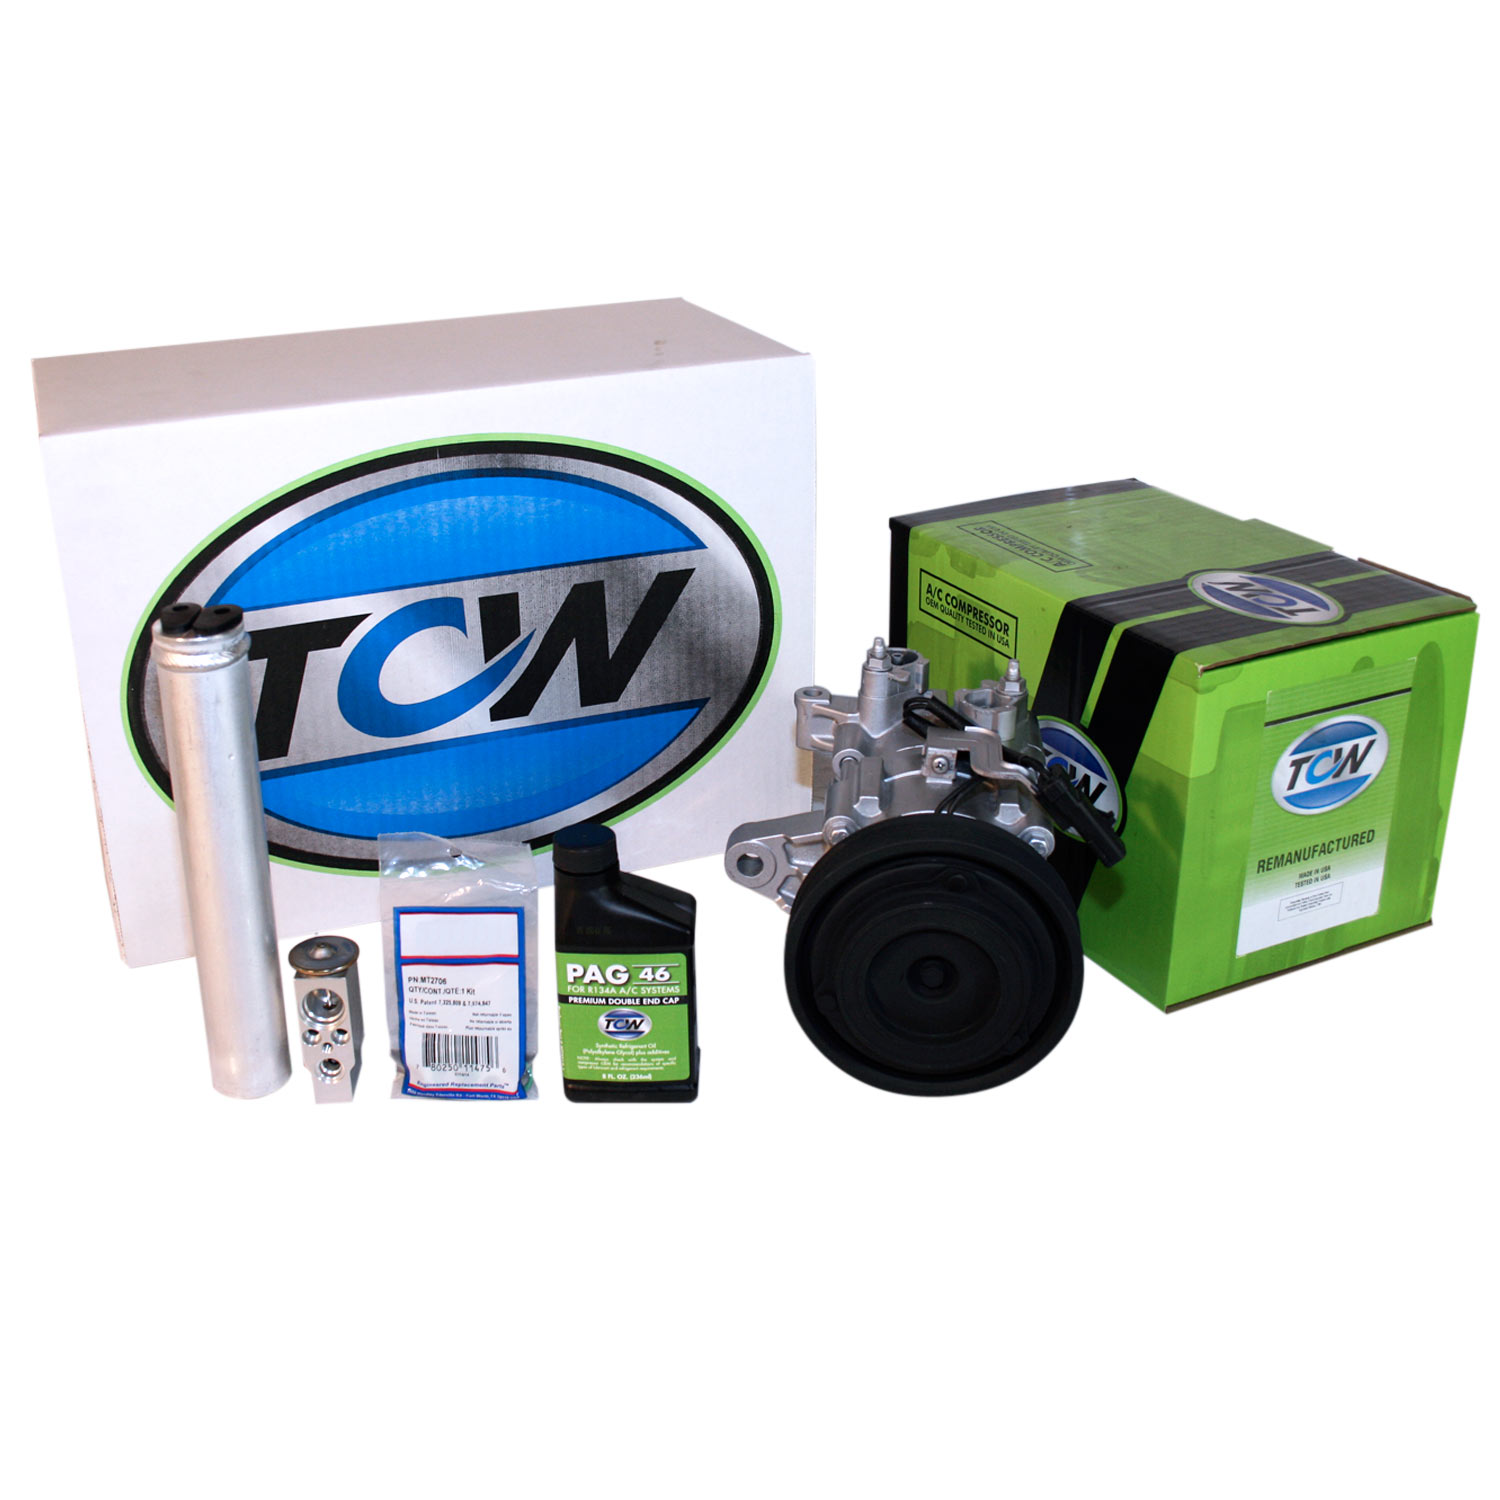 TCW Vehicle A/C Kit K1000279R Remanufactured